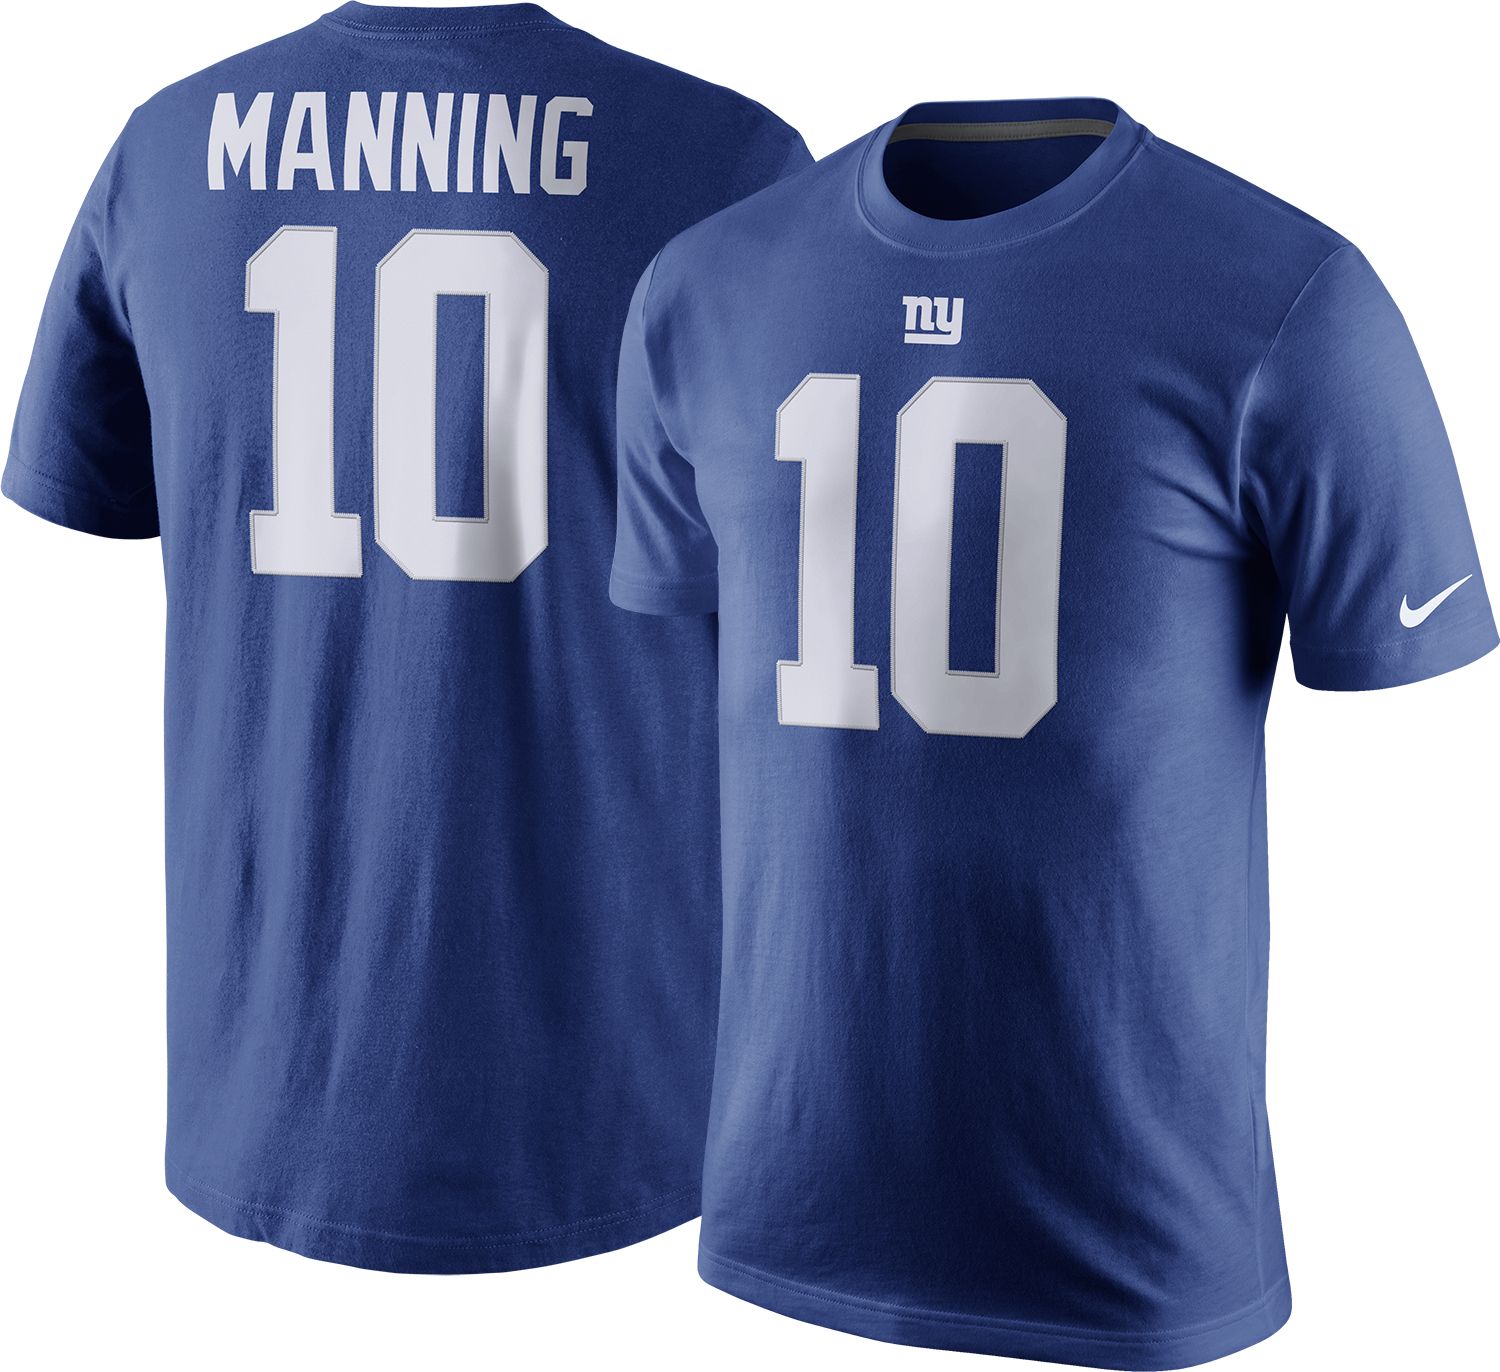 eli manning youth jersey blue